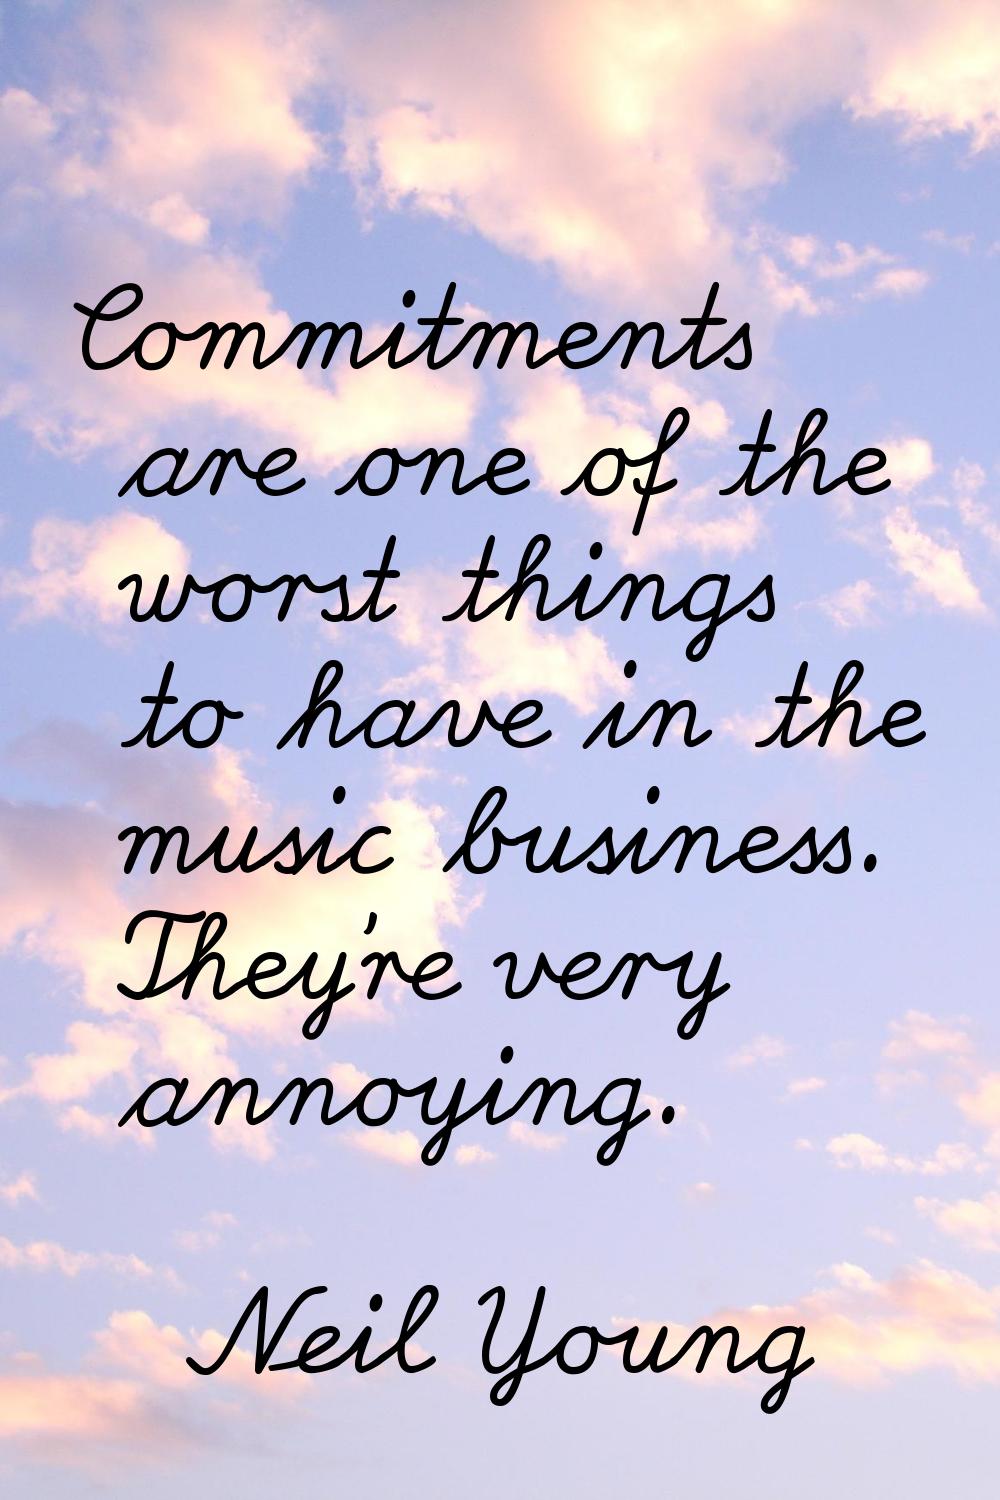 Commitments are one of the worst things to have in the music business. They're very annoying.